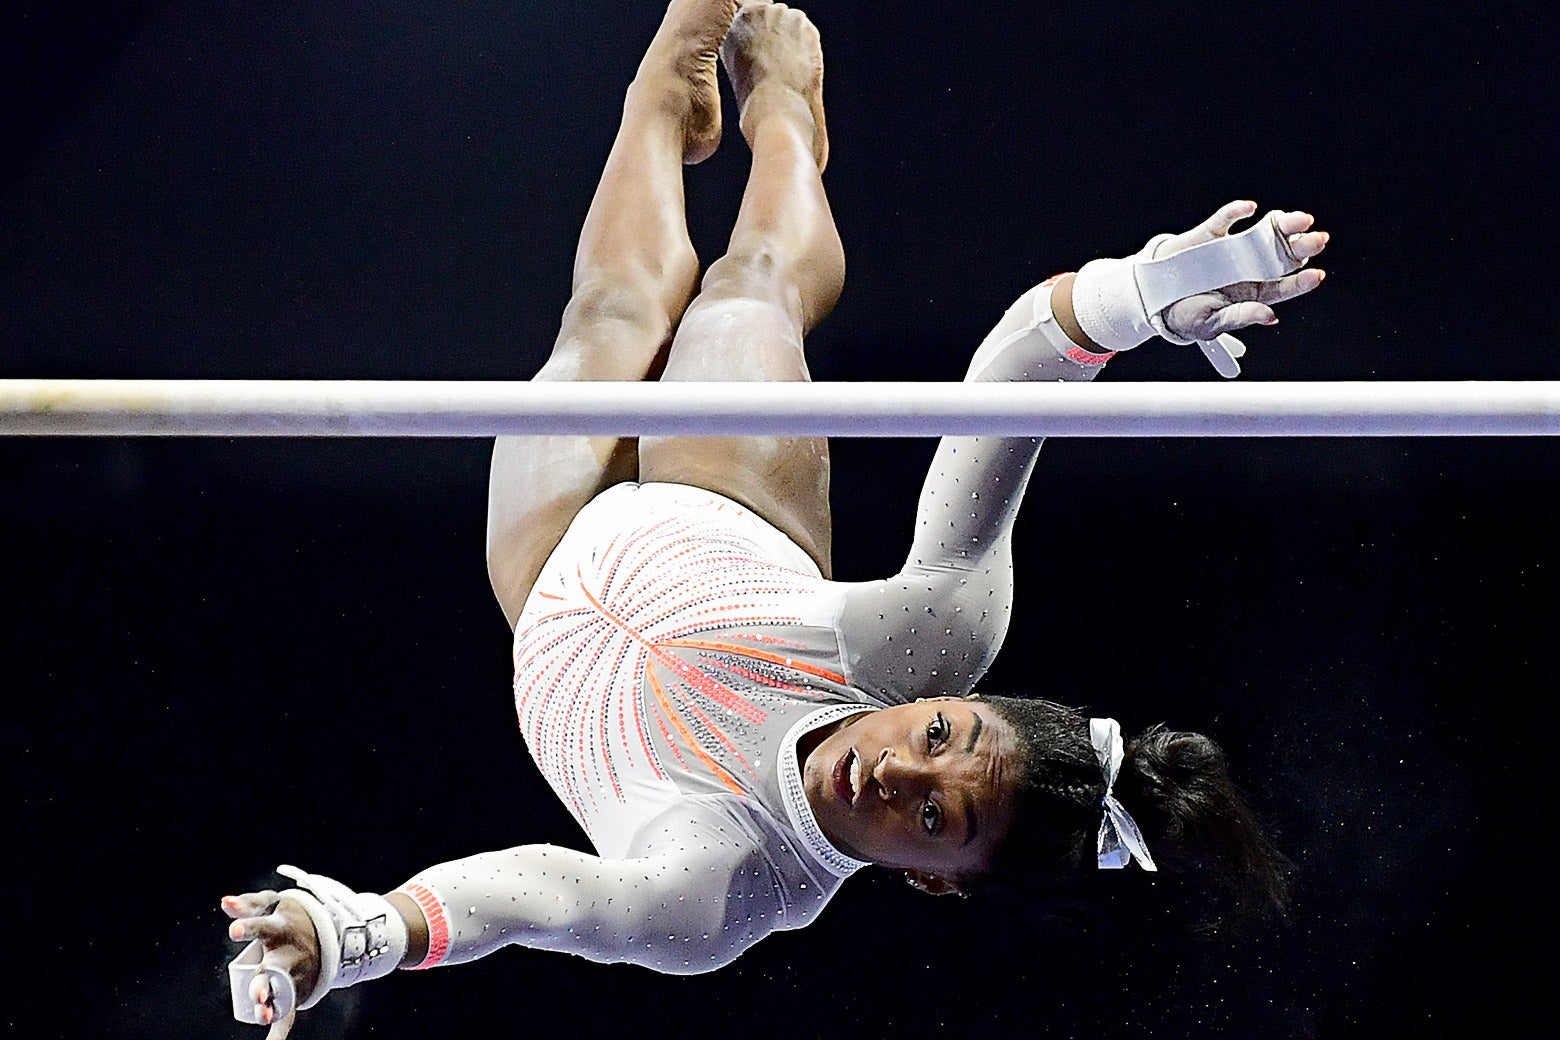 Simone Biles flipping upside-down during her uneven bars routine